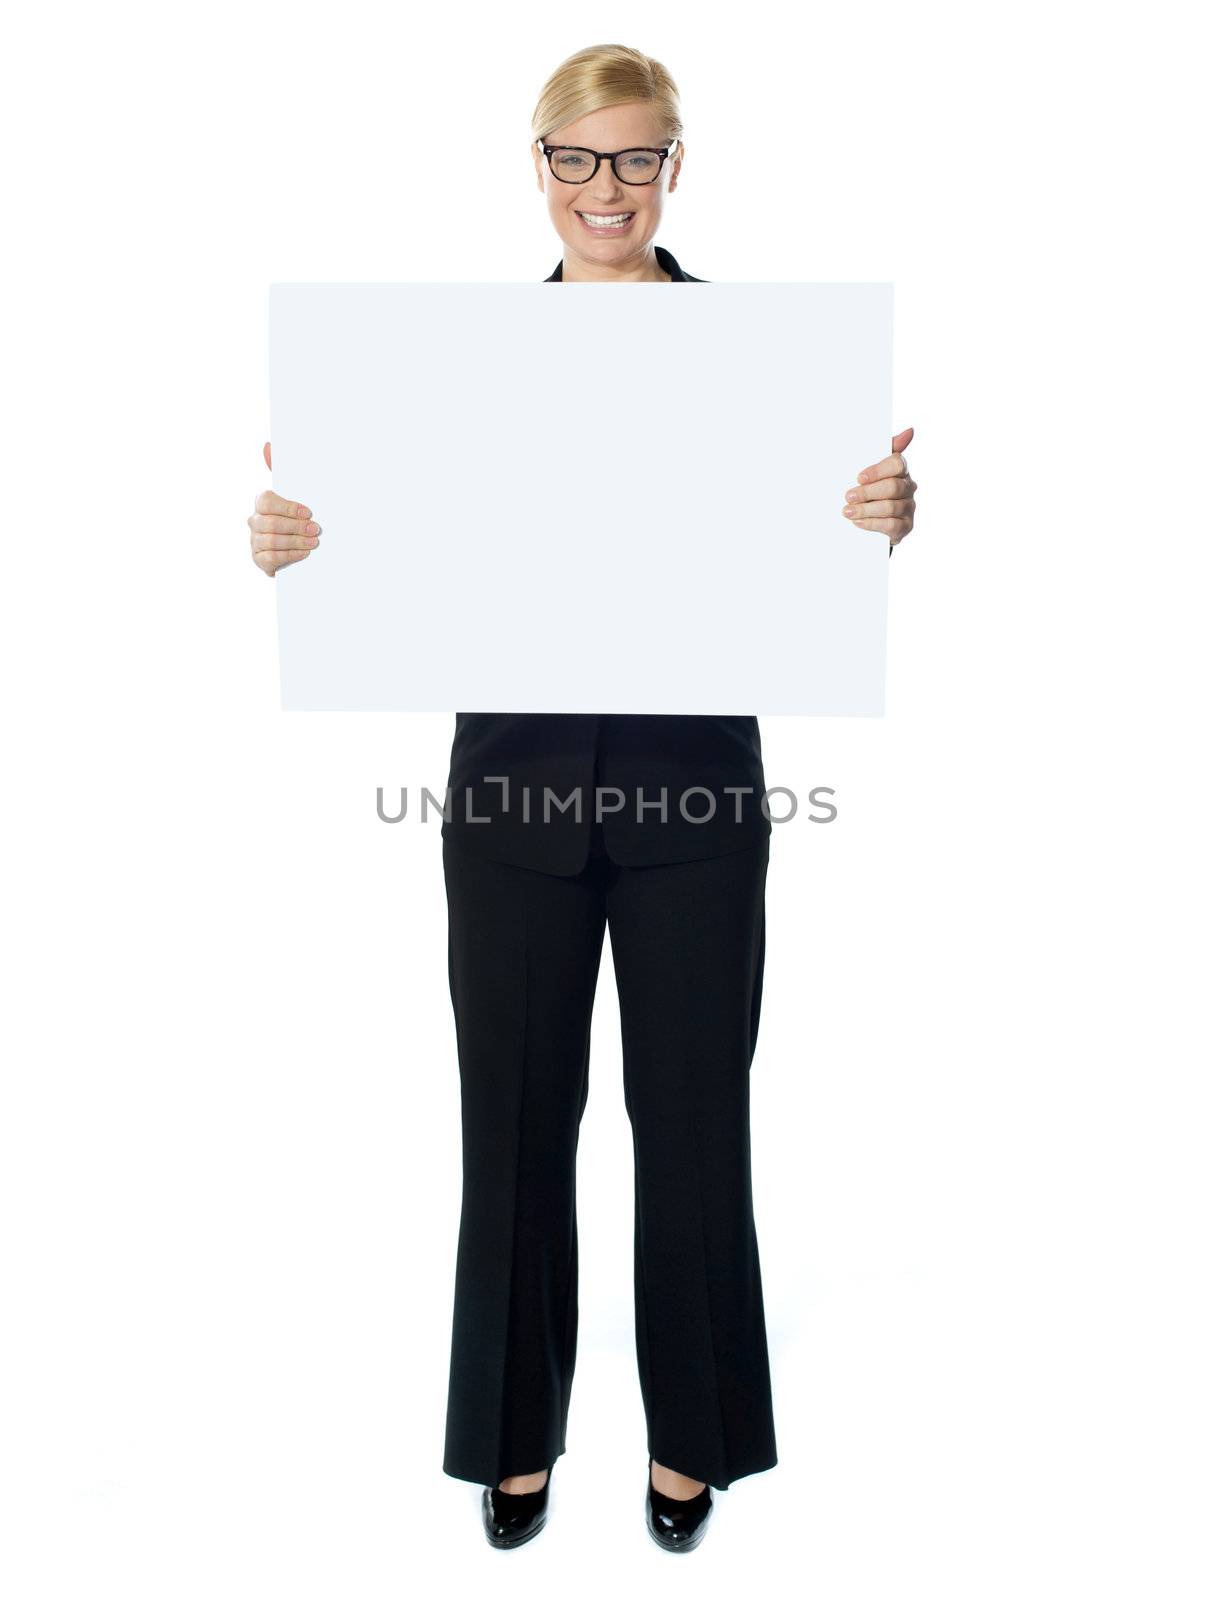 Smiling young lady holding blank banner ad by stockyimages